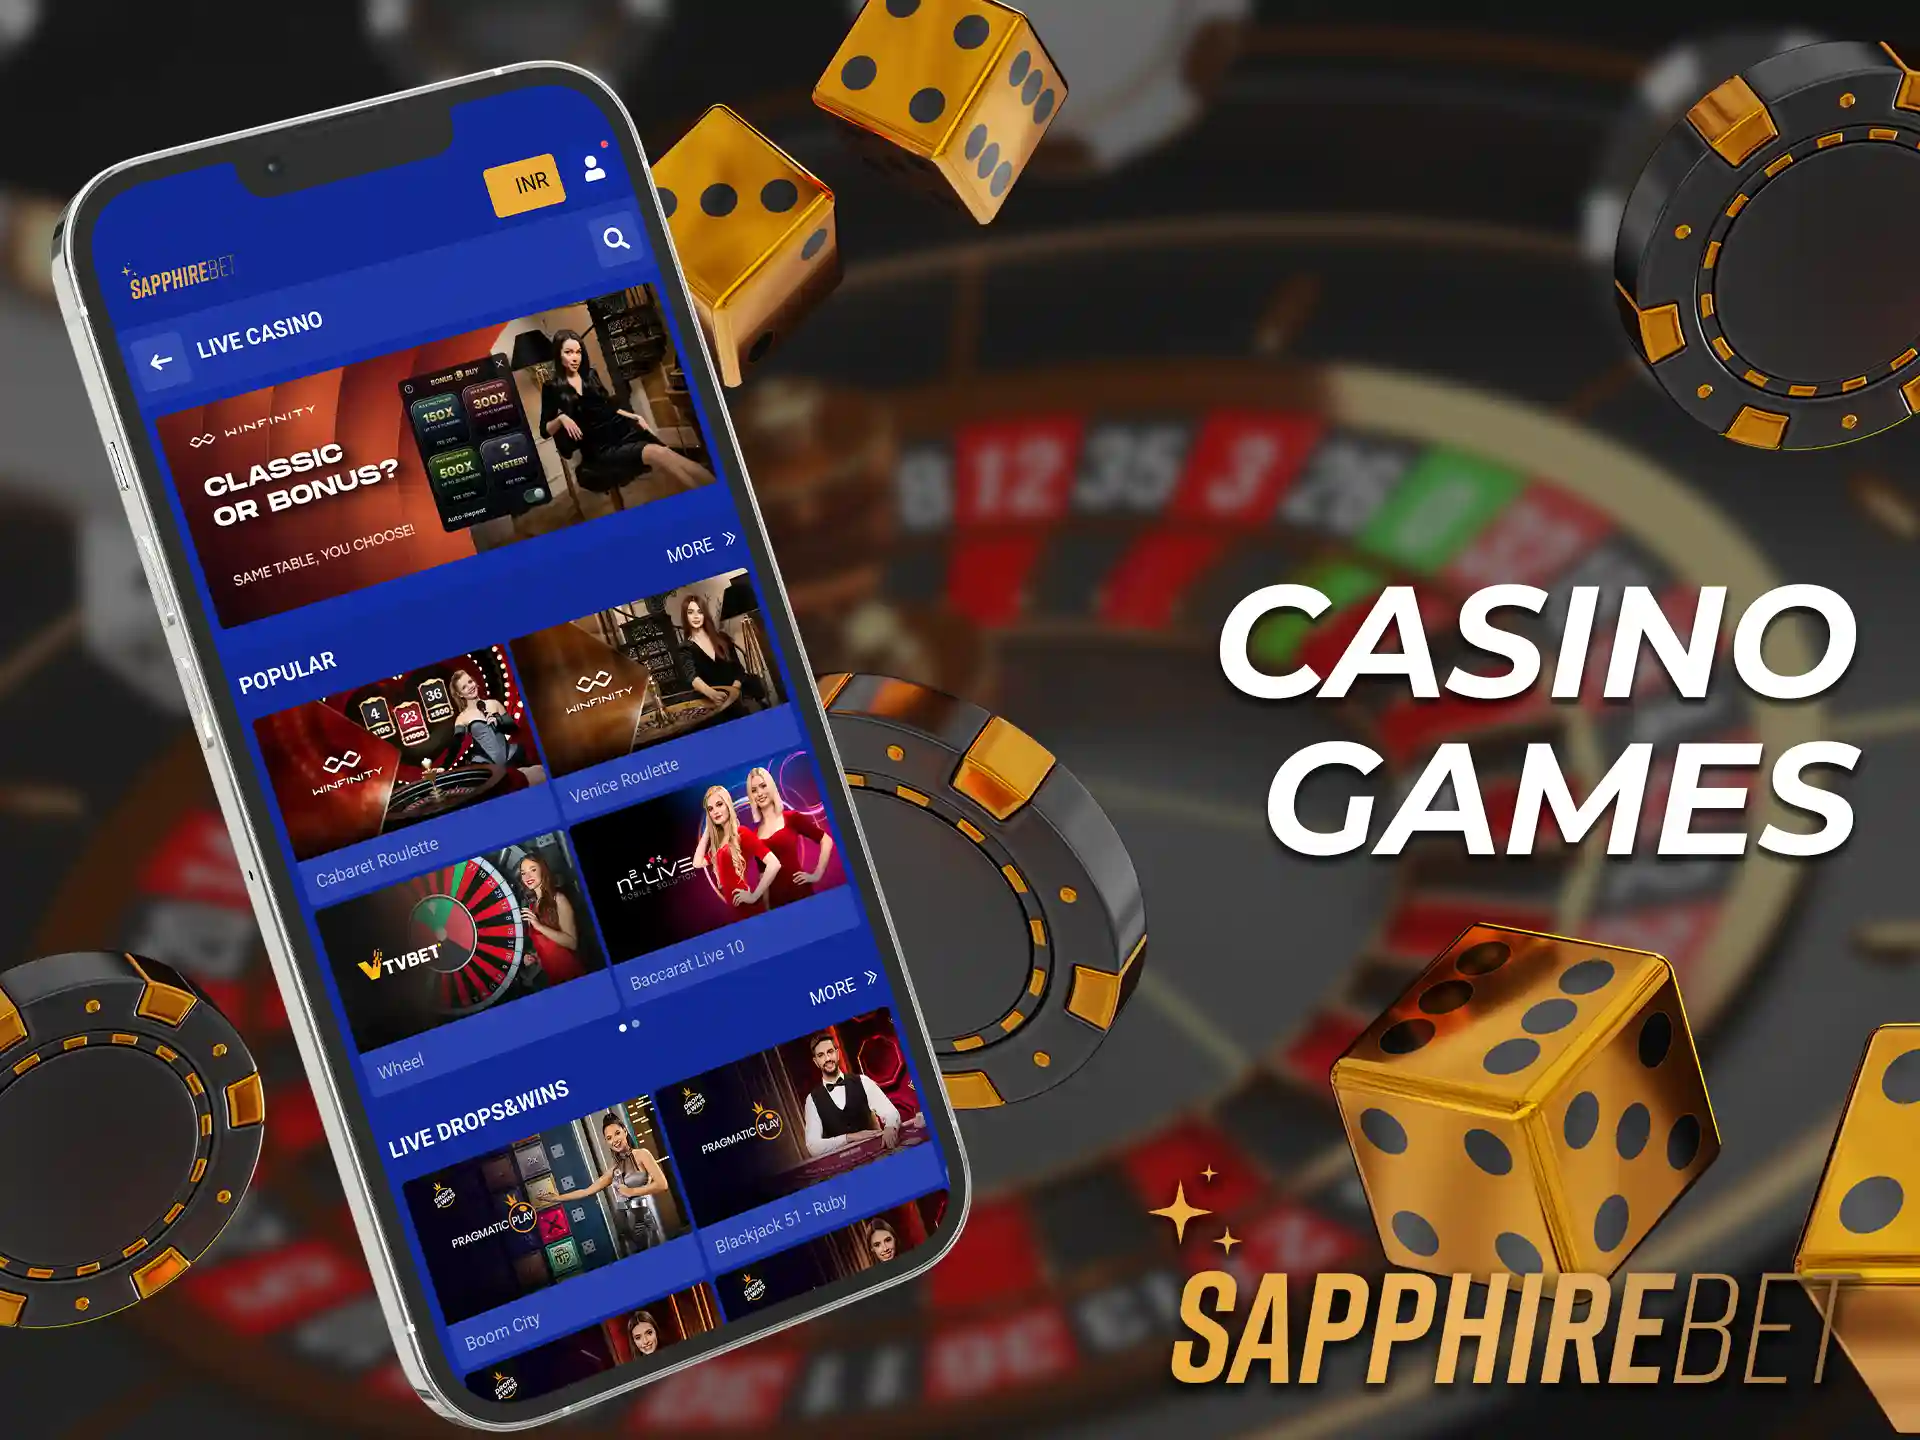 Play your favorite casino games on the SapphireBet app.